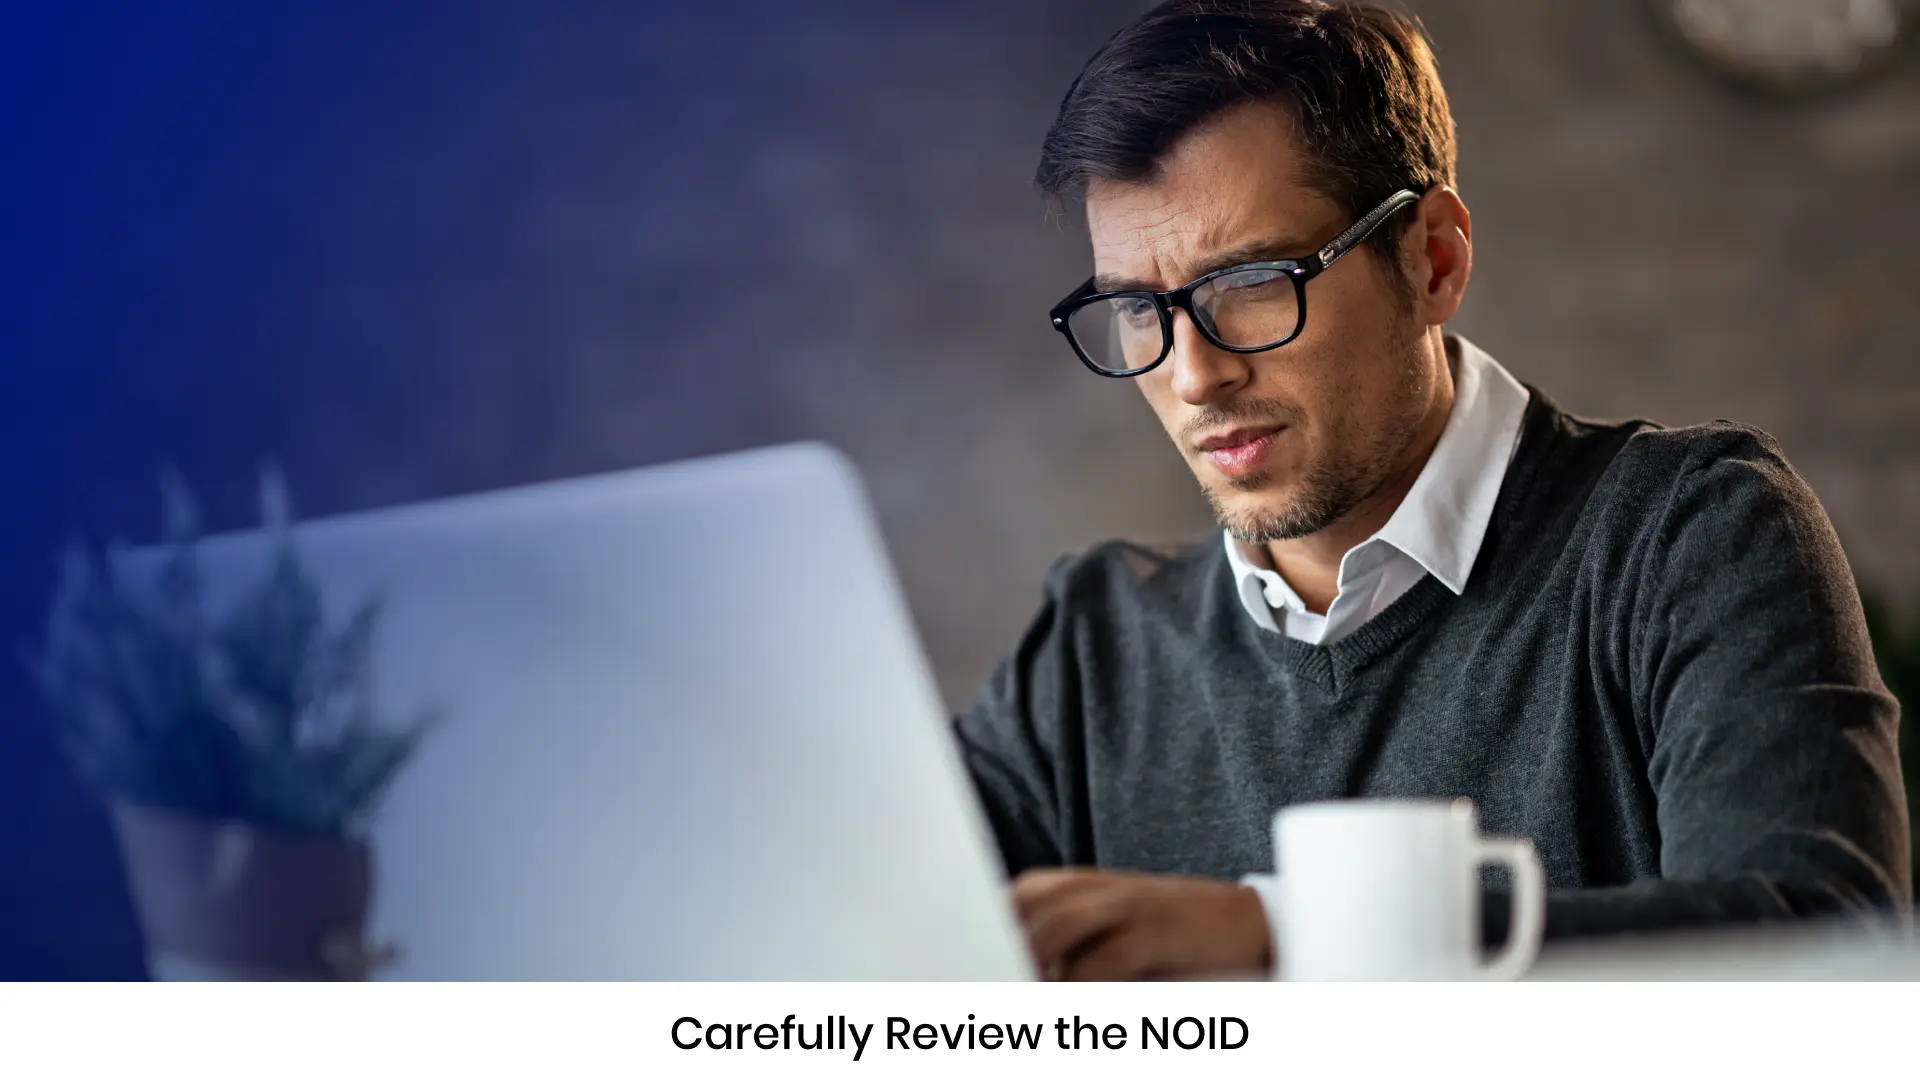 Carefully Review the NOID